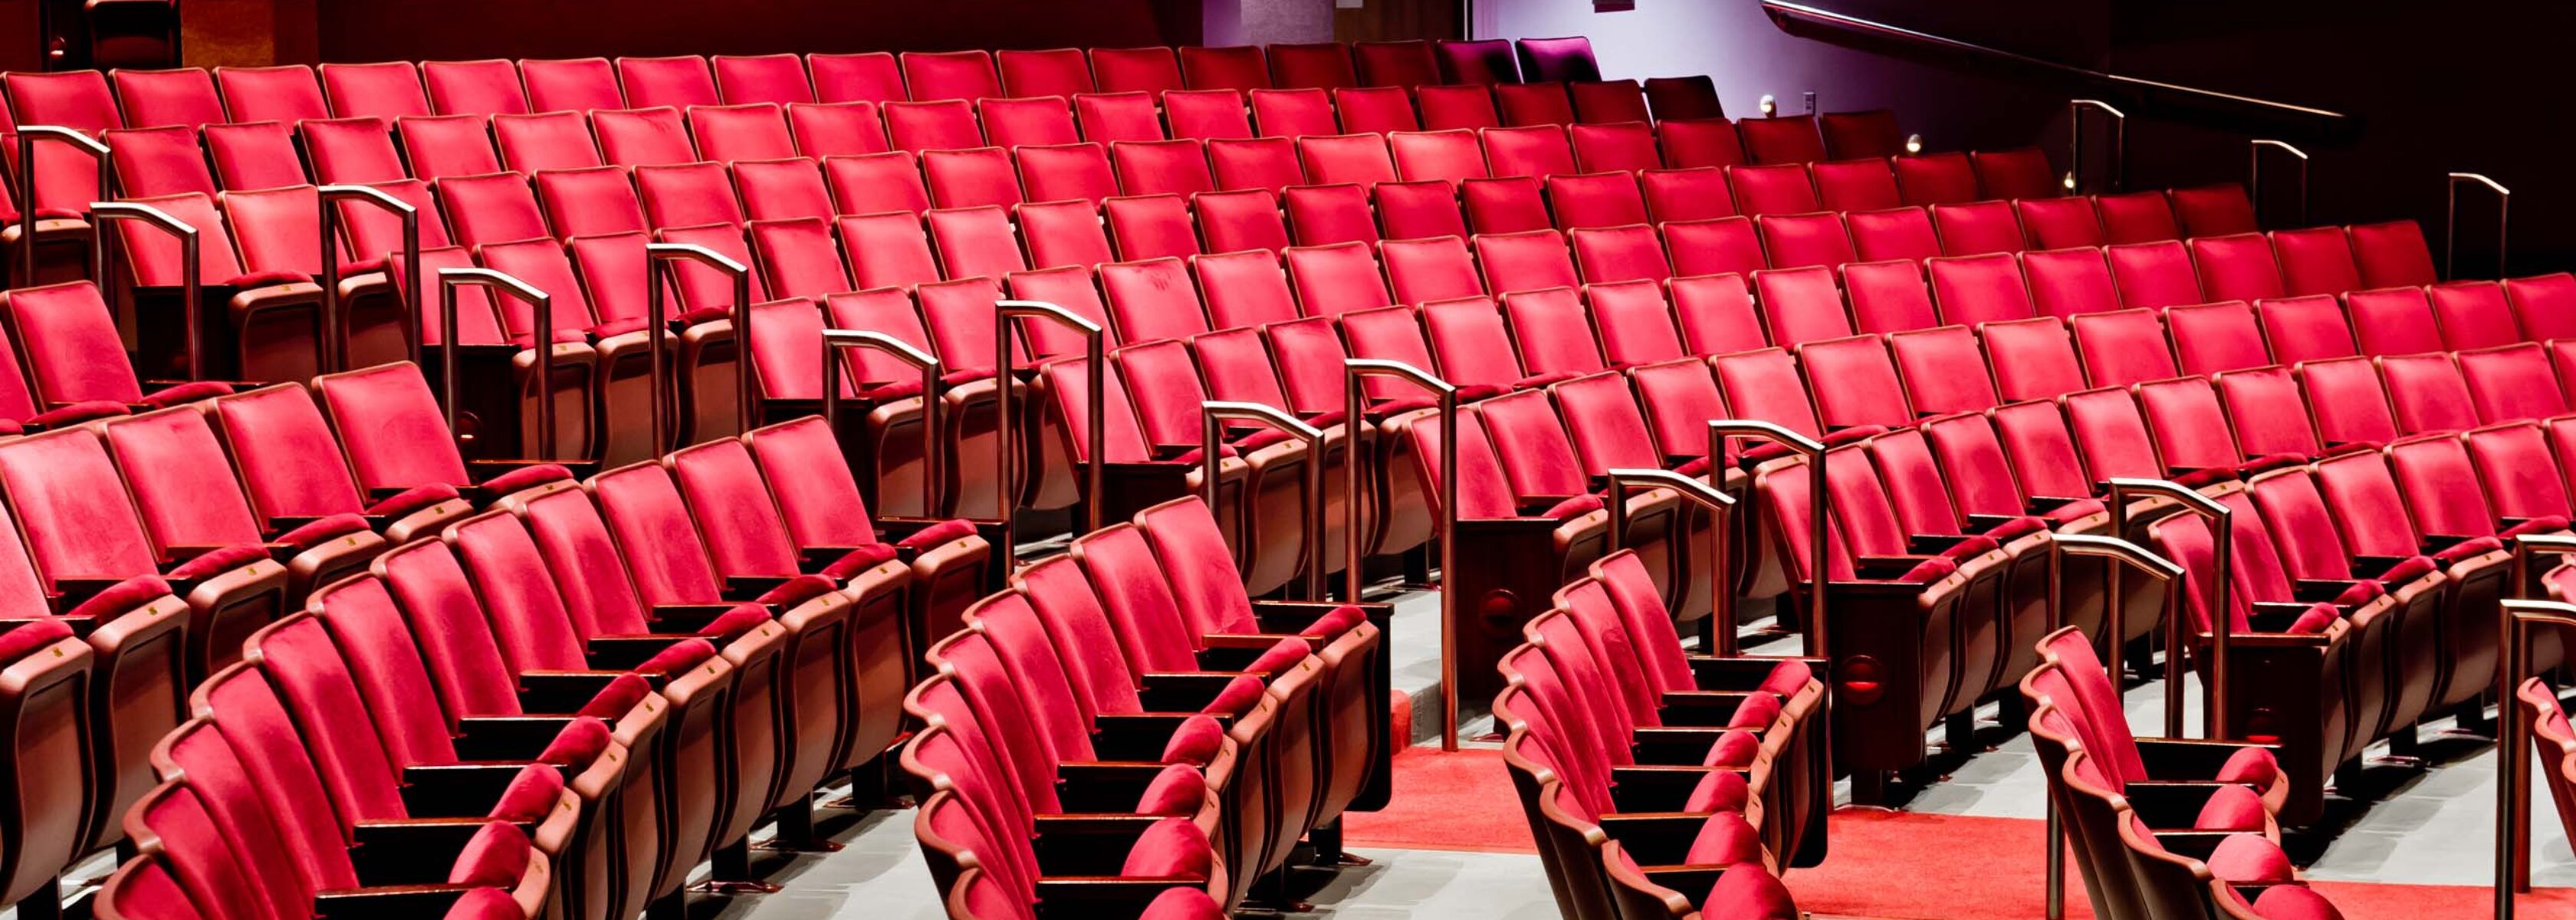 red seats in a theater.